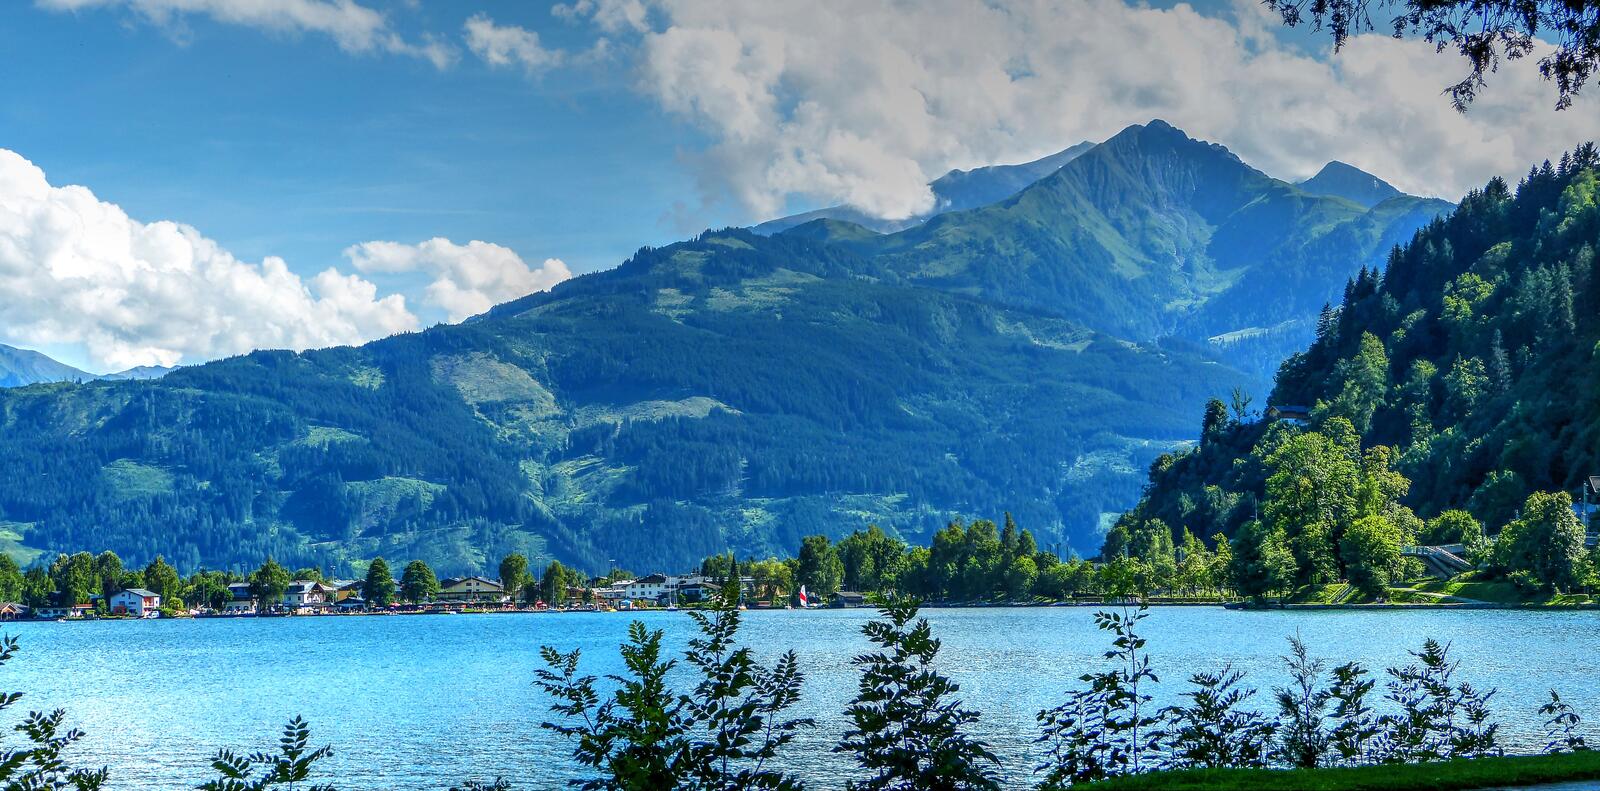 Wallpapers Lake Zell Zell am see Austria on the desktop